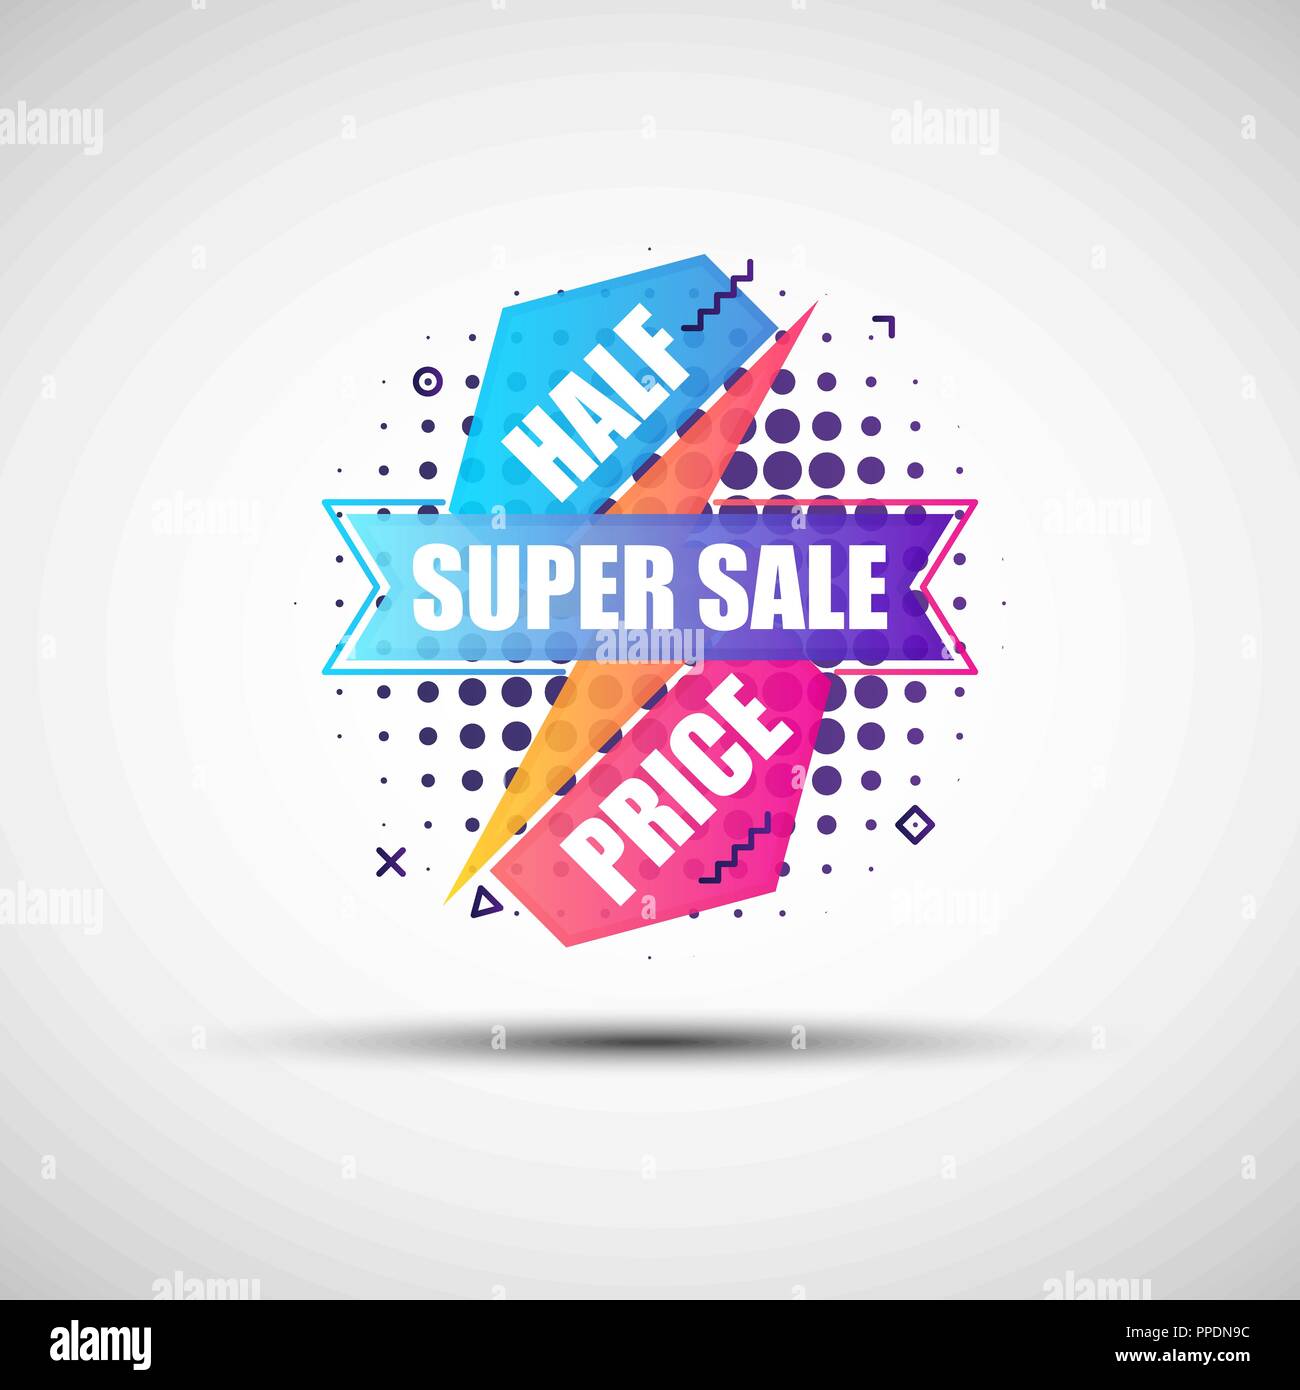 Modern geometric gradient sale banner. Vector illustration of abstract colorful half price super sale banner made of different simple shapes Stock Vector